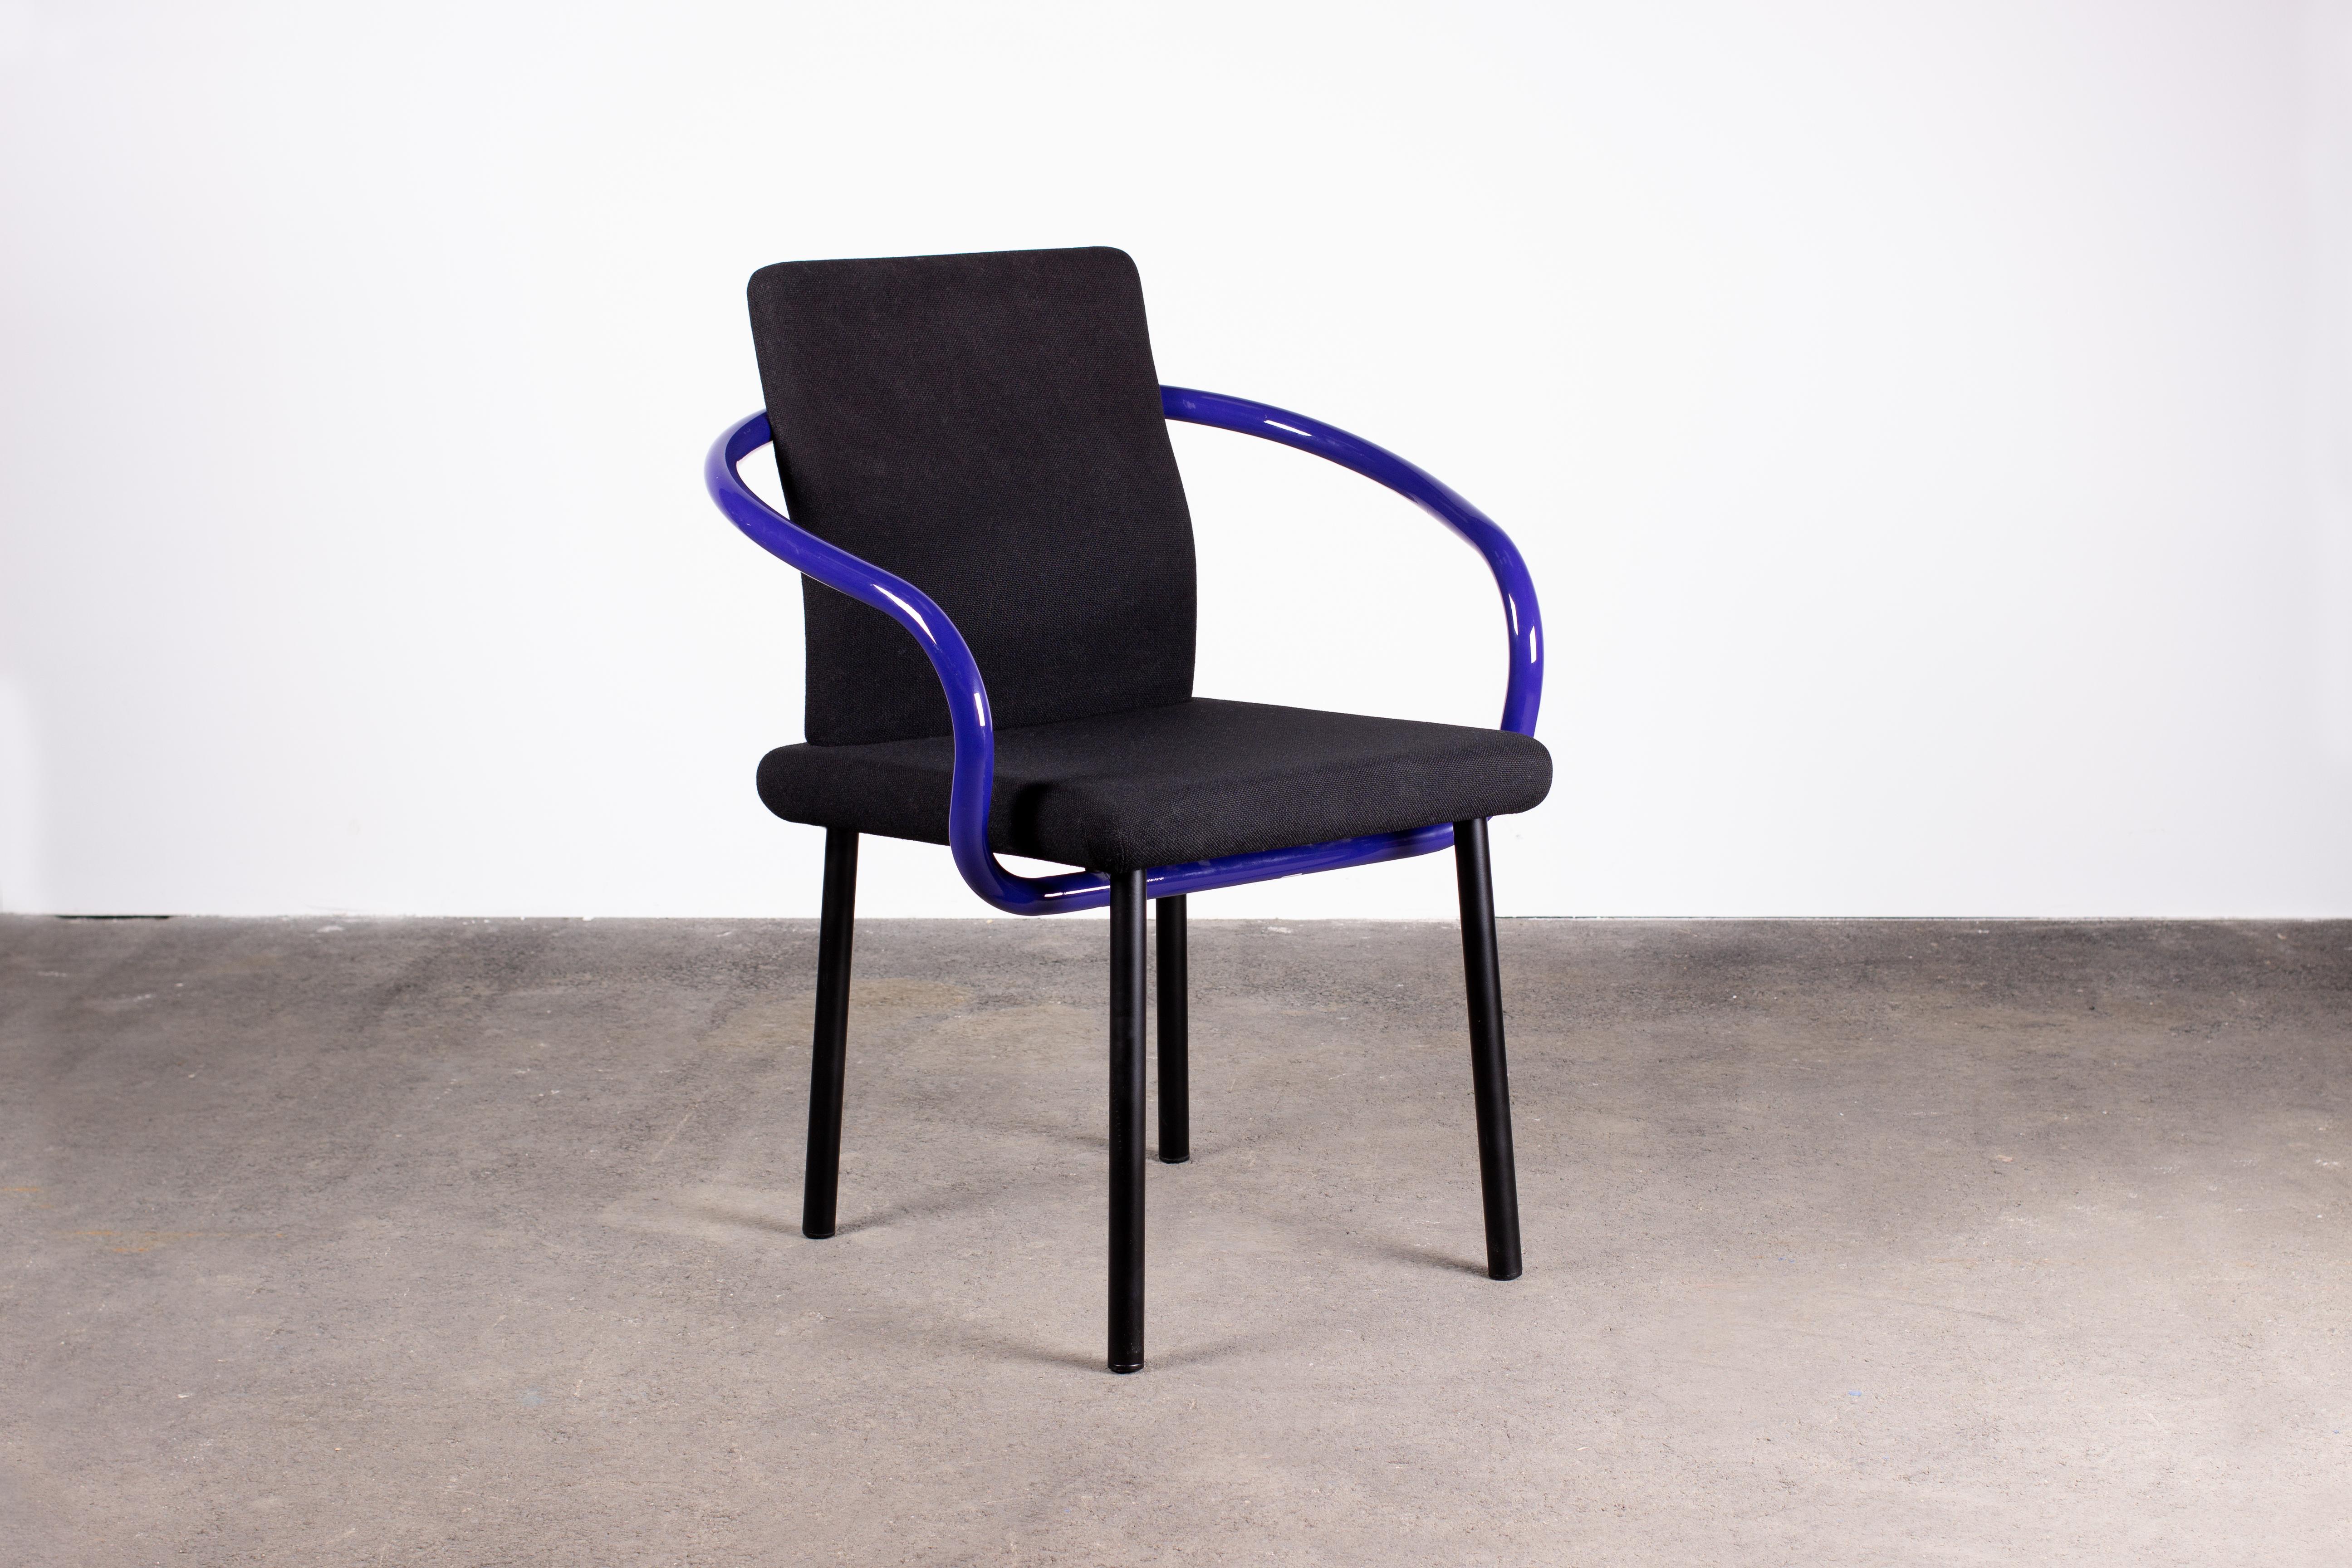 Post-Modern Pair of Ettore Sottsass Mandarin Chairs for Knoll in Violet & Black